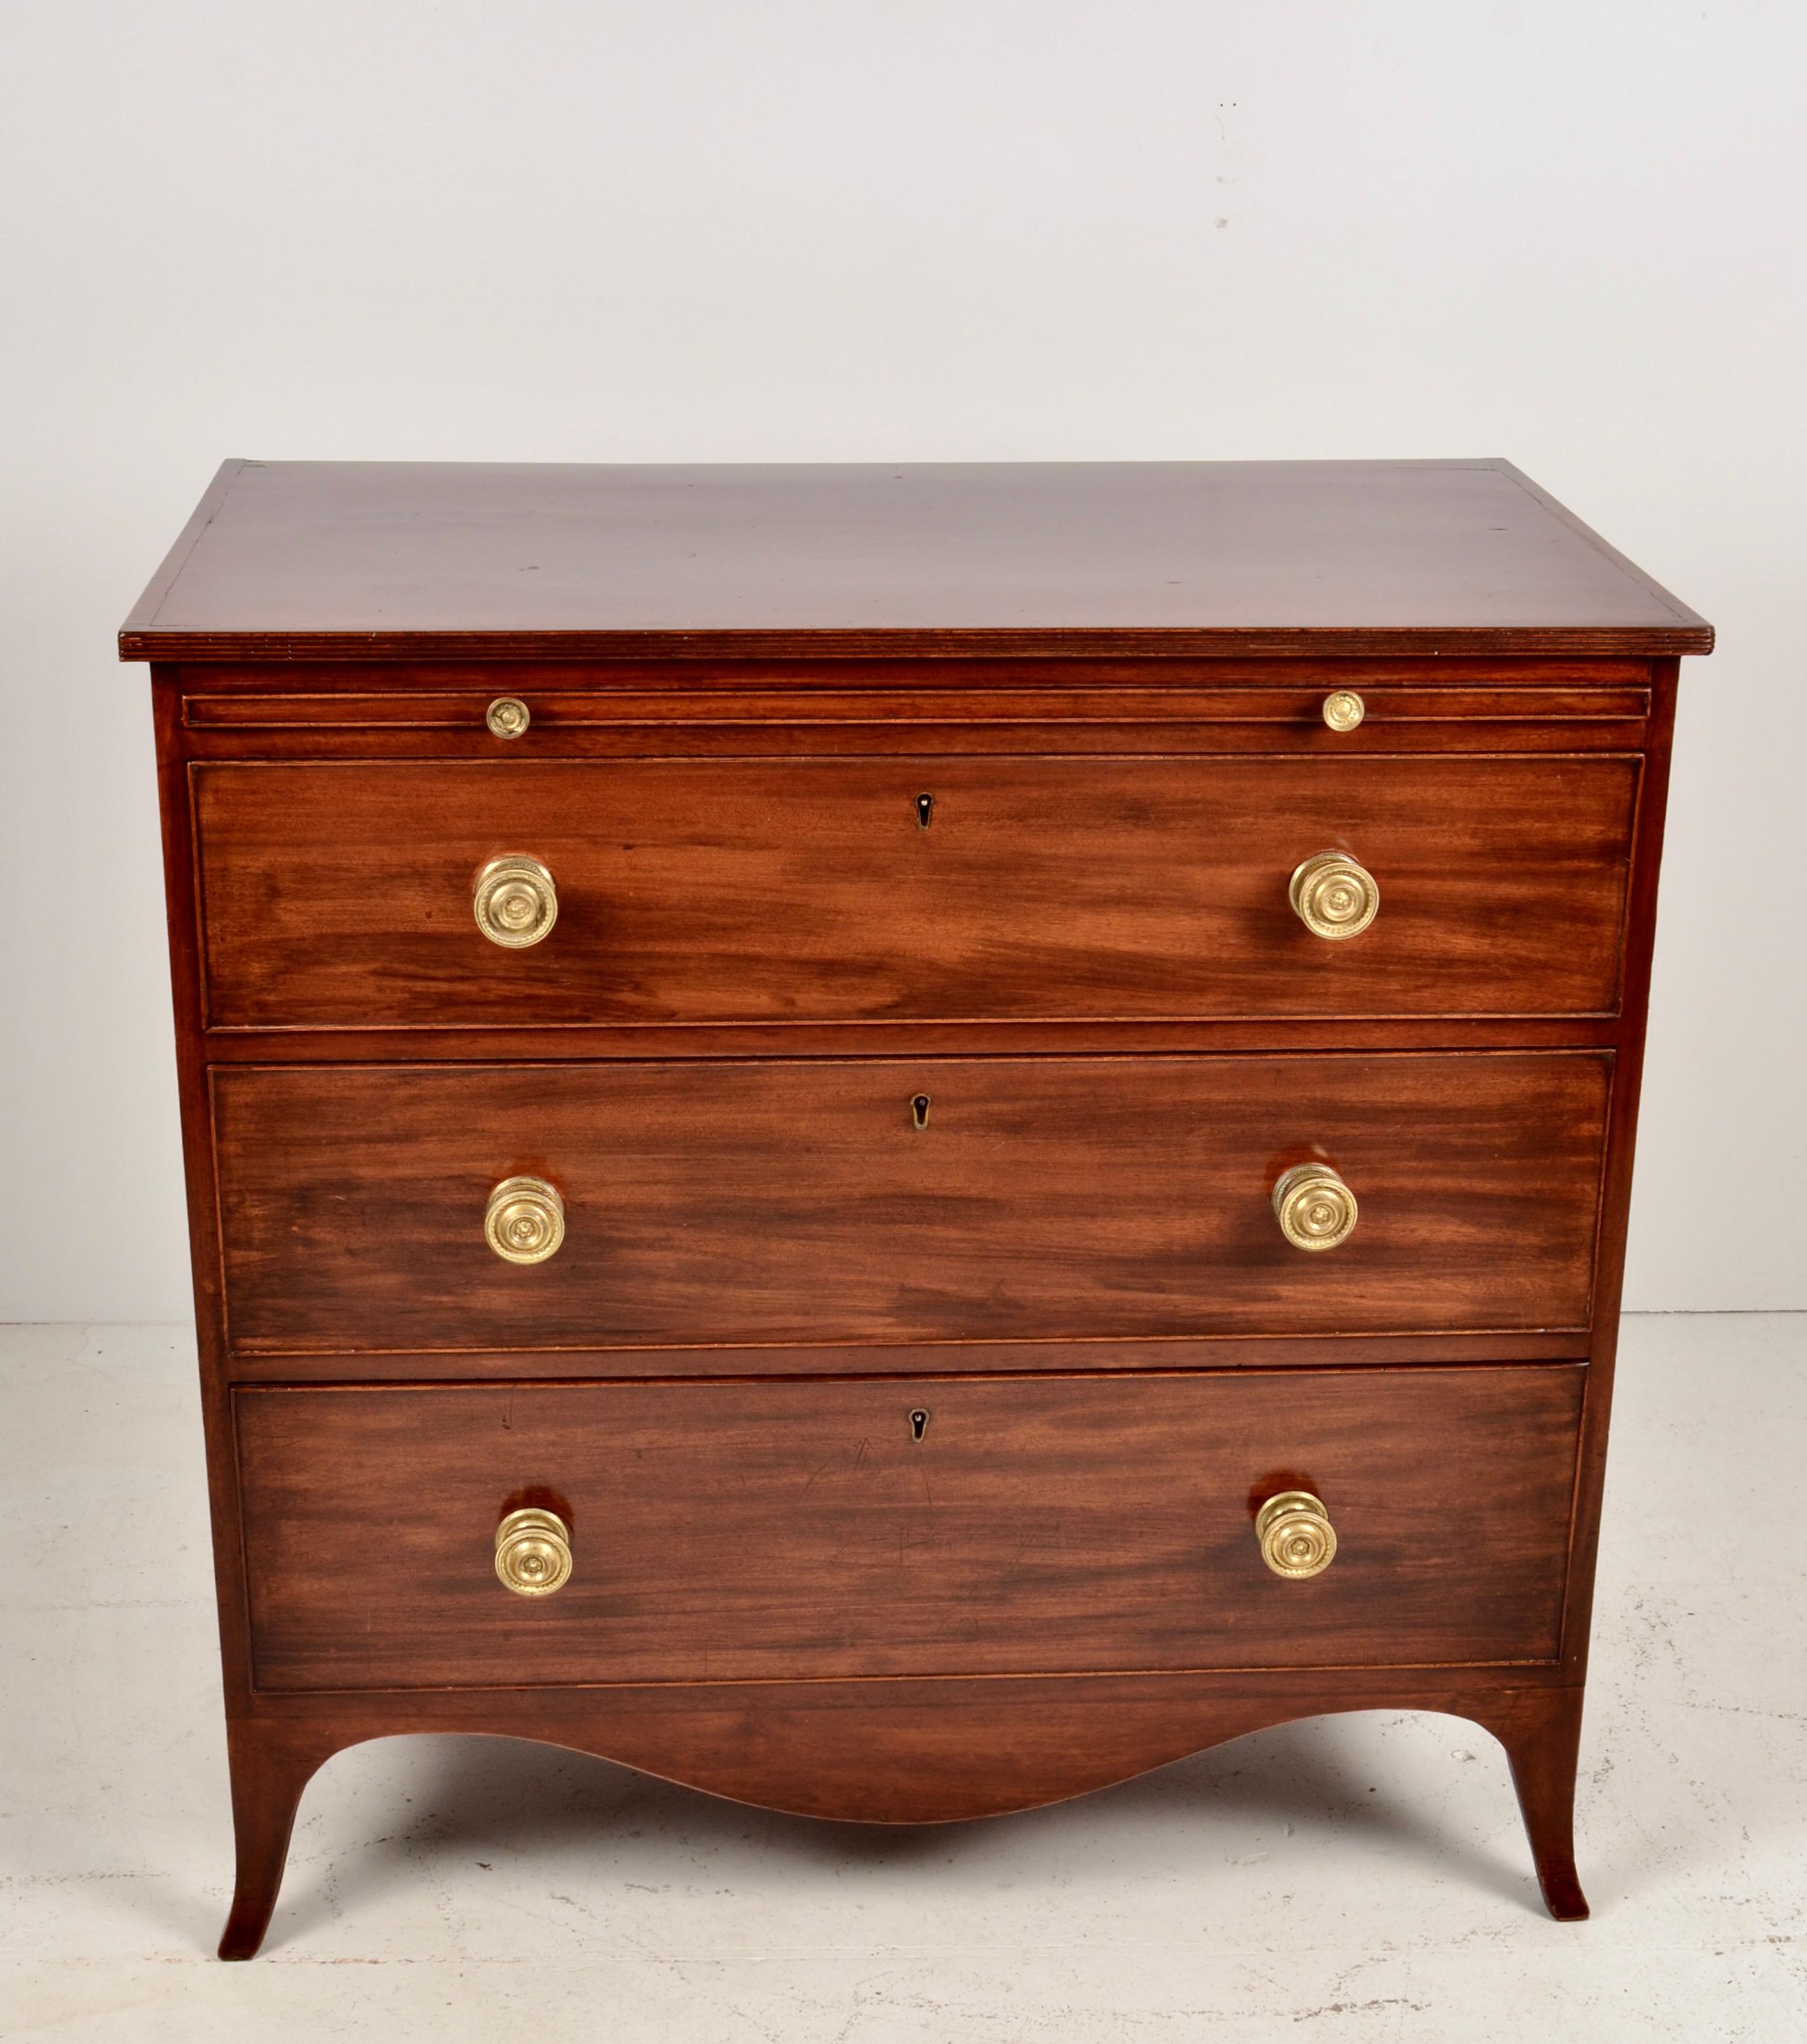 Regency Chest, beautifully French polished mahogany with original solid brass pulls. Flared French feet. Purchased in 2000 from HRW Antiques in London. Very fine condition, lovely rich finish.